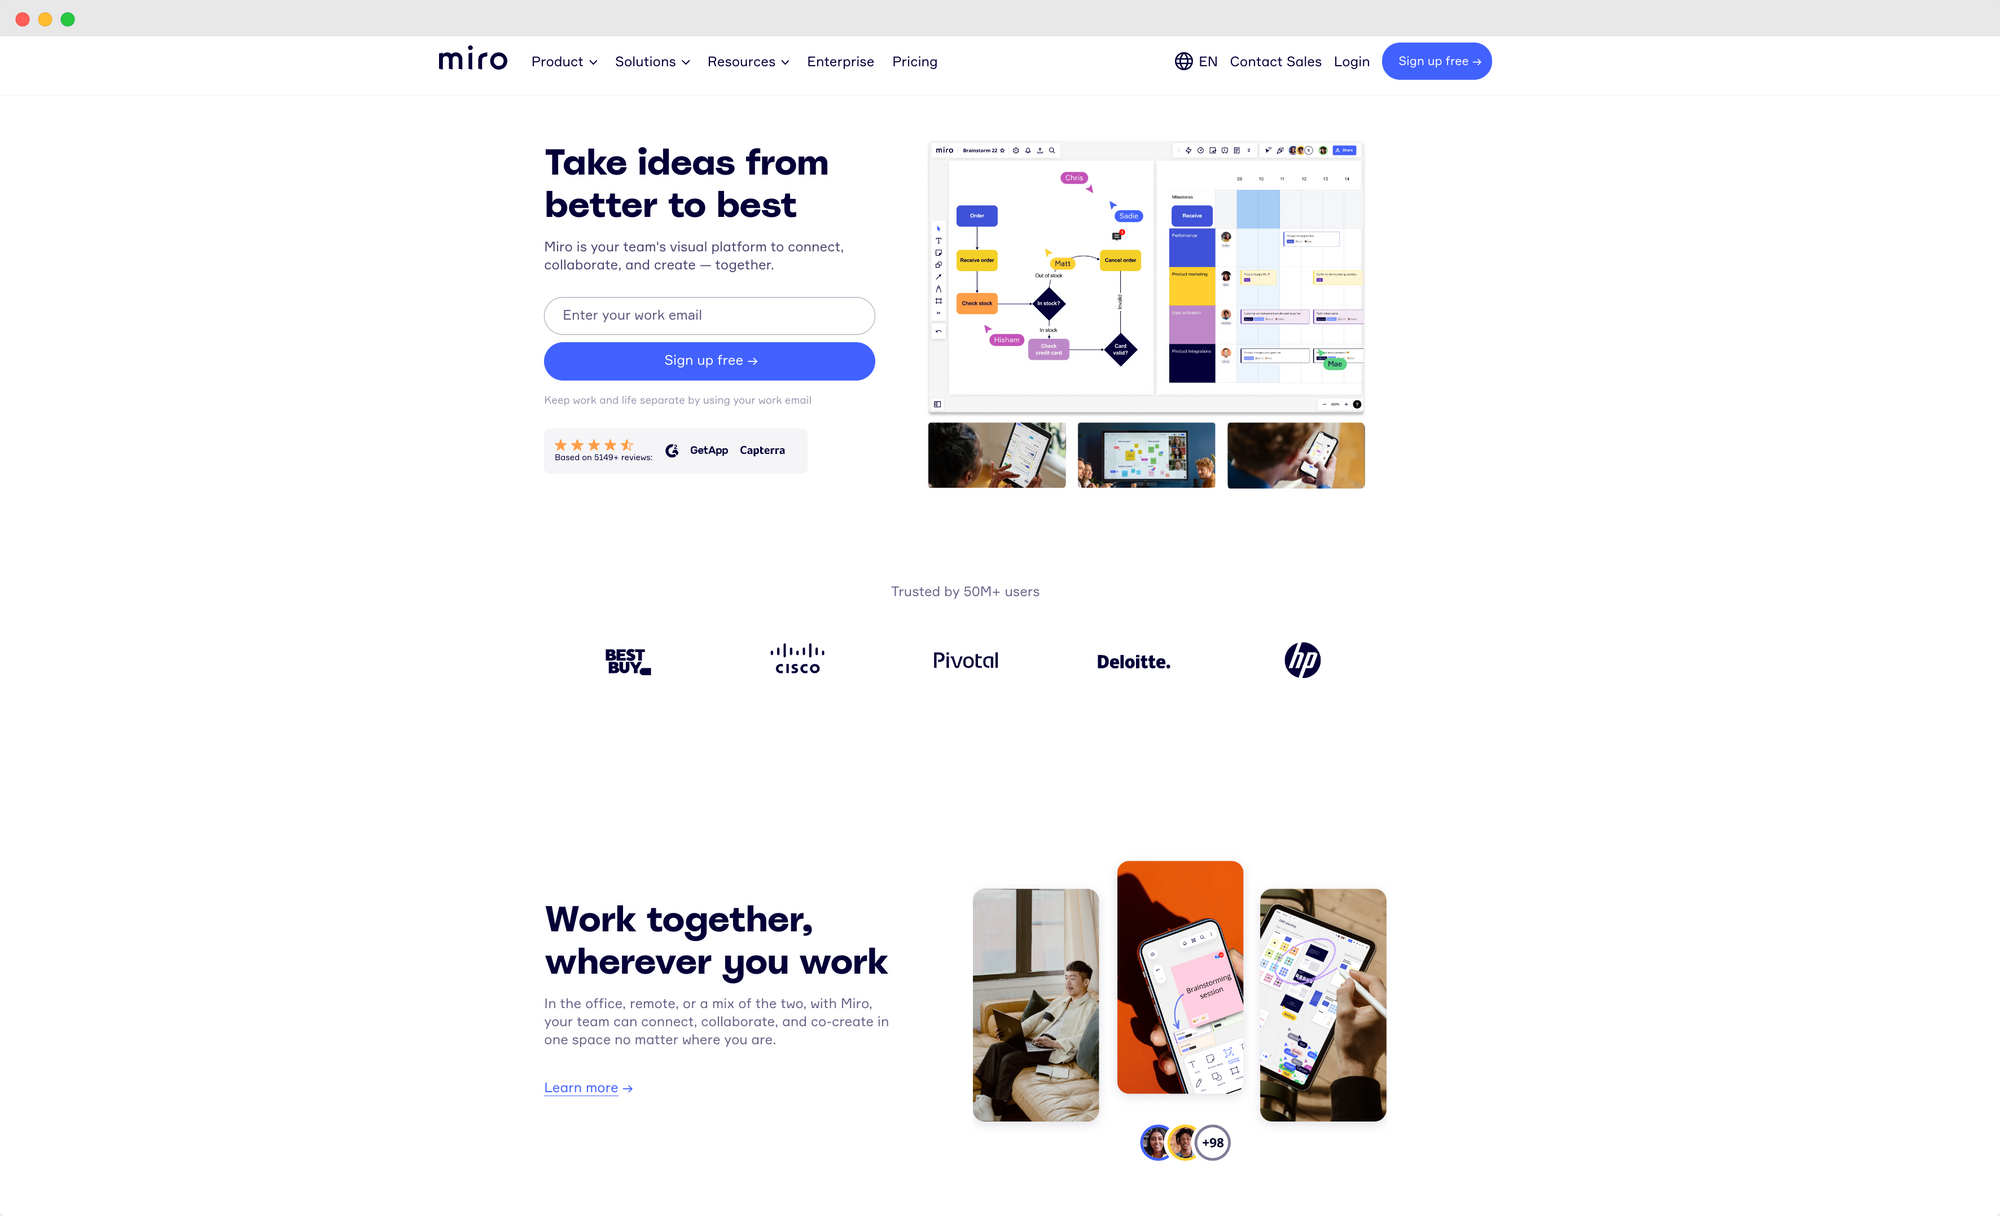 Homepage of Miro showcasing collaborative tools and client logos